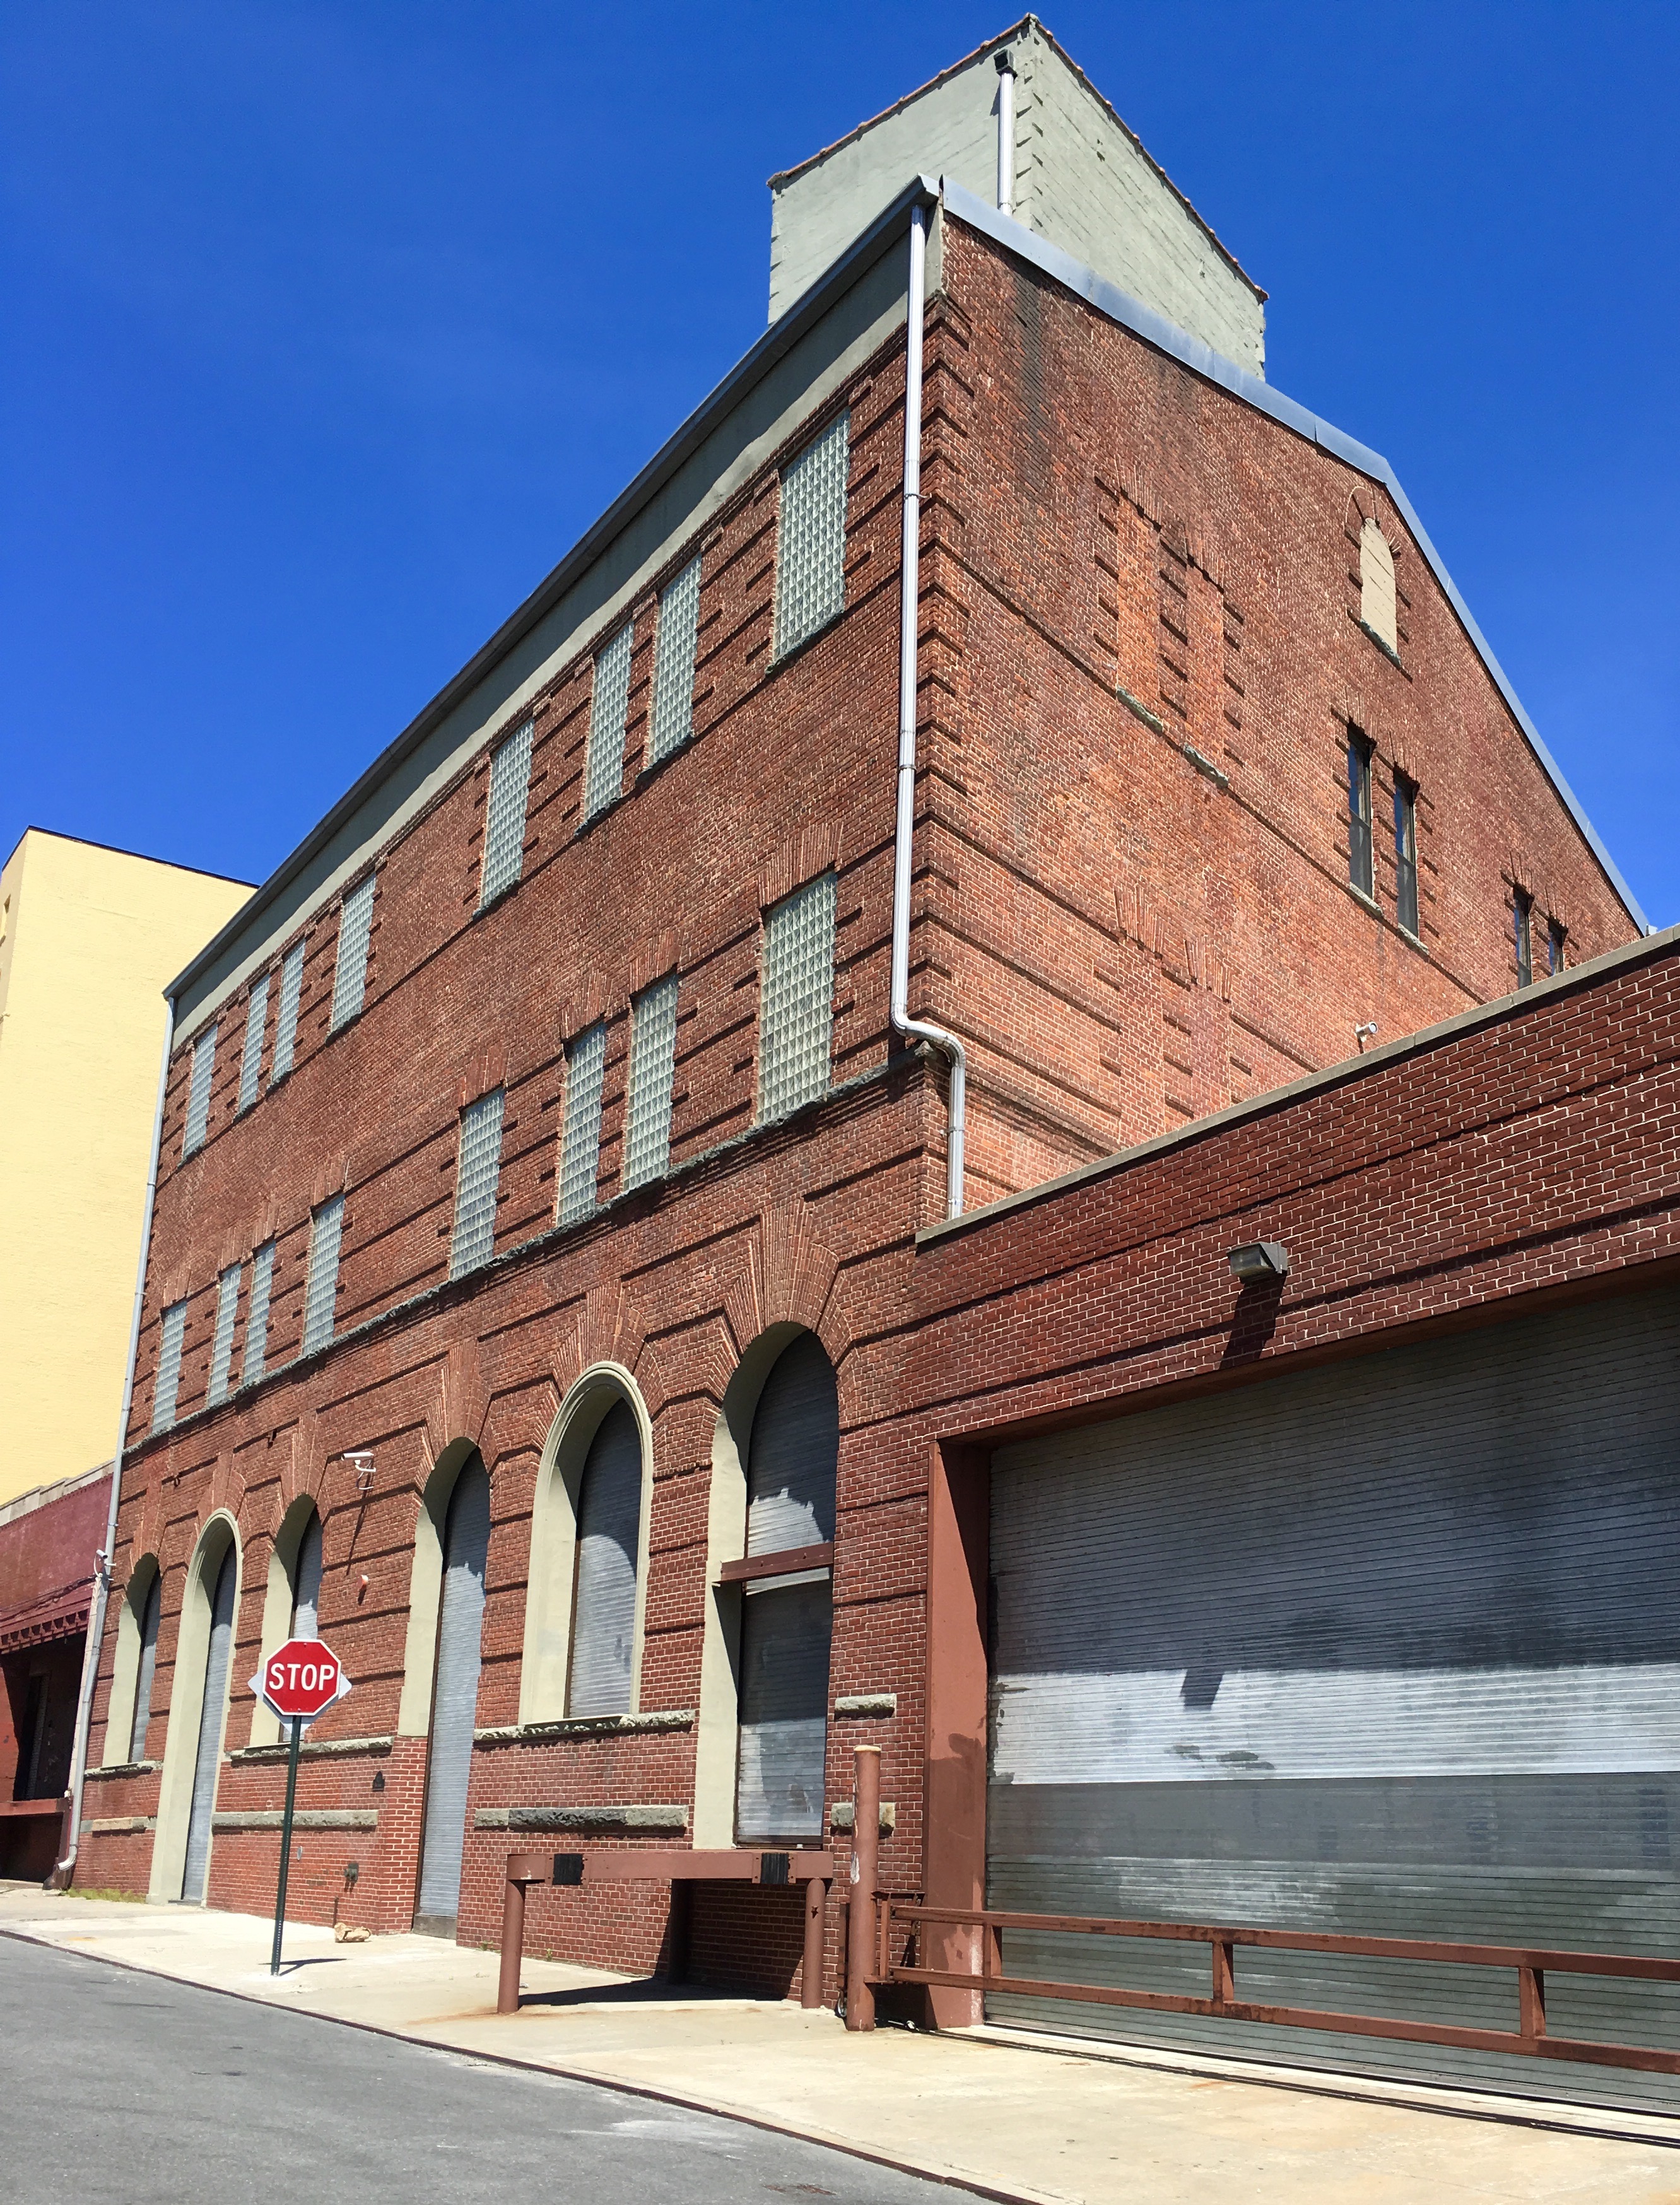 Preservationists want the Ice House and Brewing Complex (shown here) and several other Gowanus properties to be considered for landmark designation. Eagle file photo by Lore Croghan